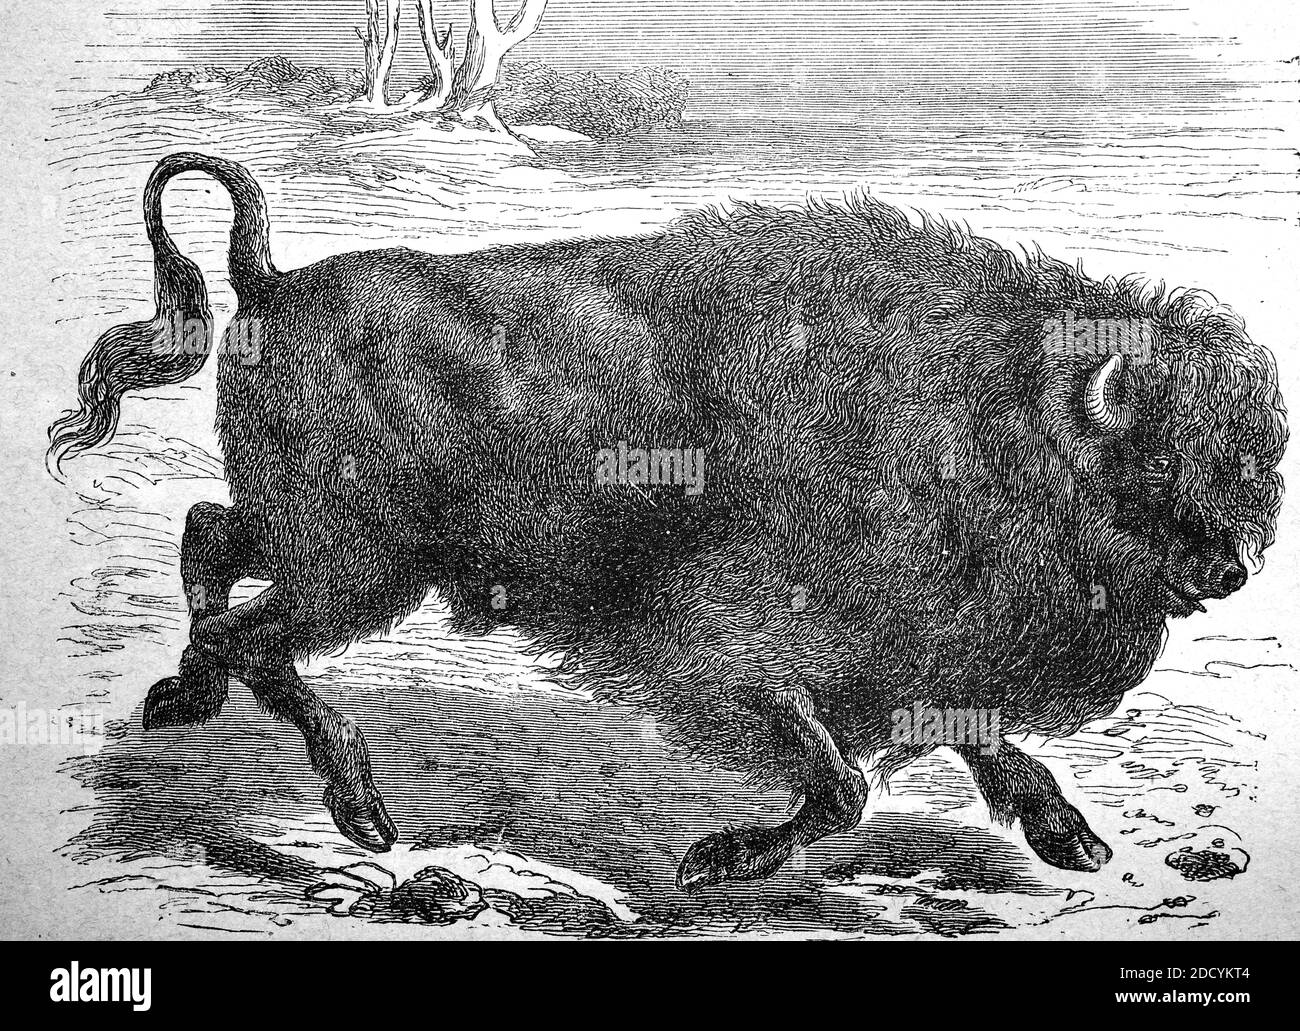 Bison, wild cattle, Bos bison, from North America, illustration from the year 1880  /  Bison, Wildrind, Bos bison, aus Nordamerika, Illustration aus dem Jahre 1880, Historisch, historical, digital improved reproduction of an original from the 19th century / digitale Reproduktion einer Originalvorlage aus dem 19. Jahrhundert, Stock Photo